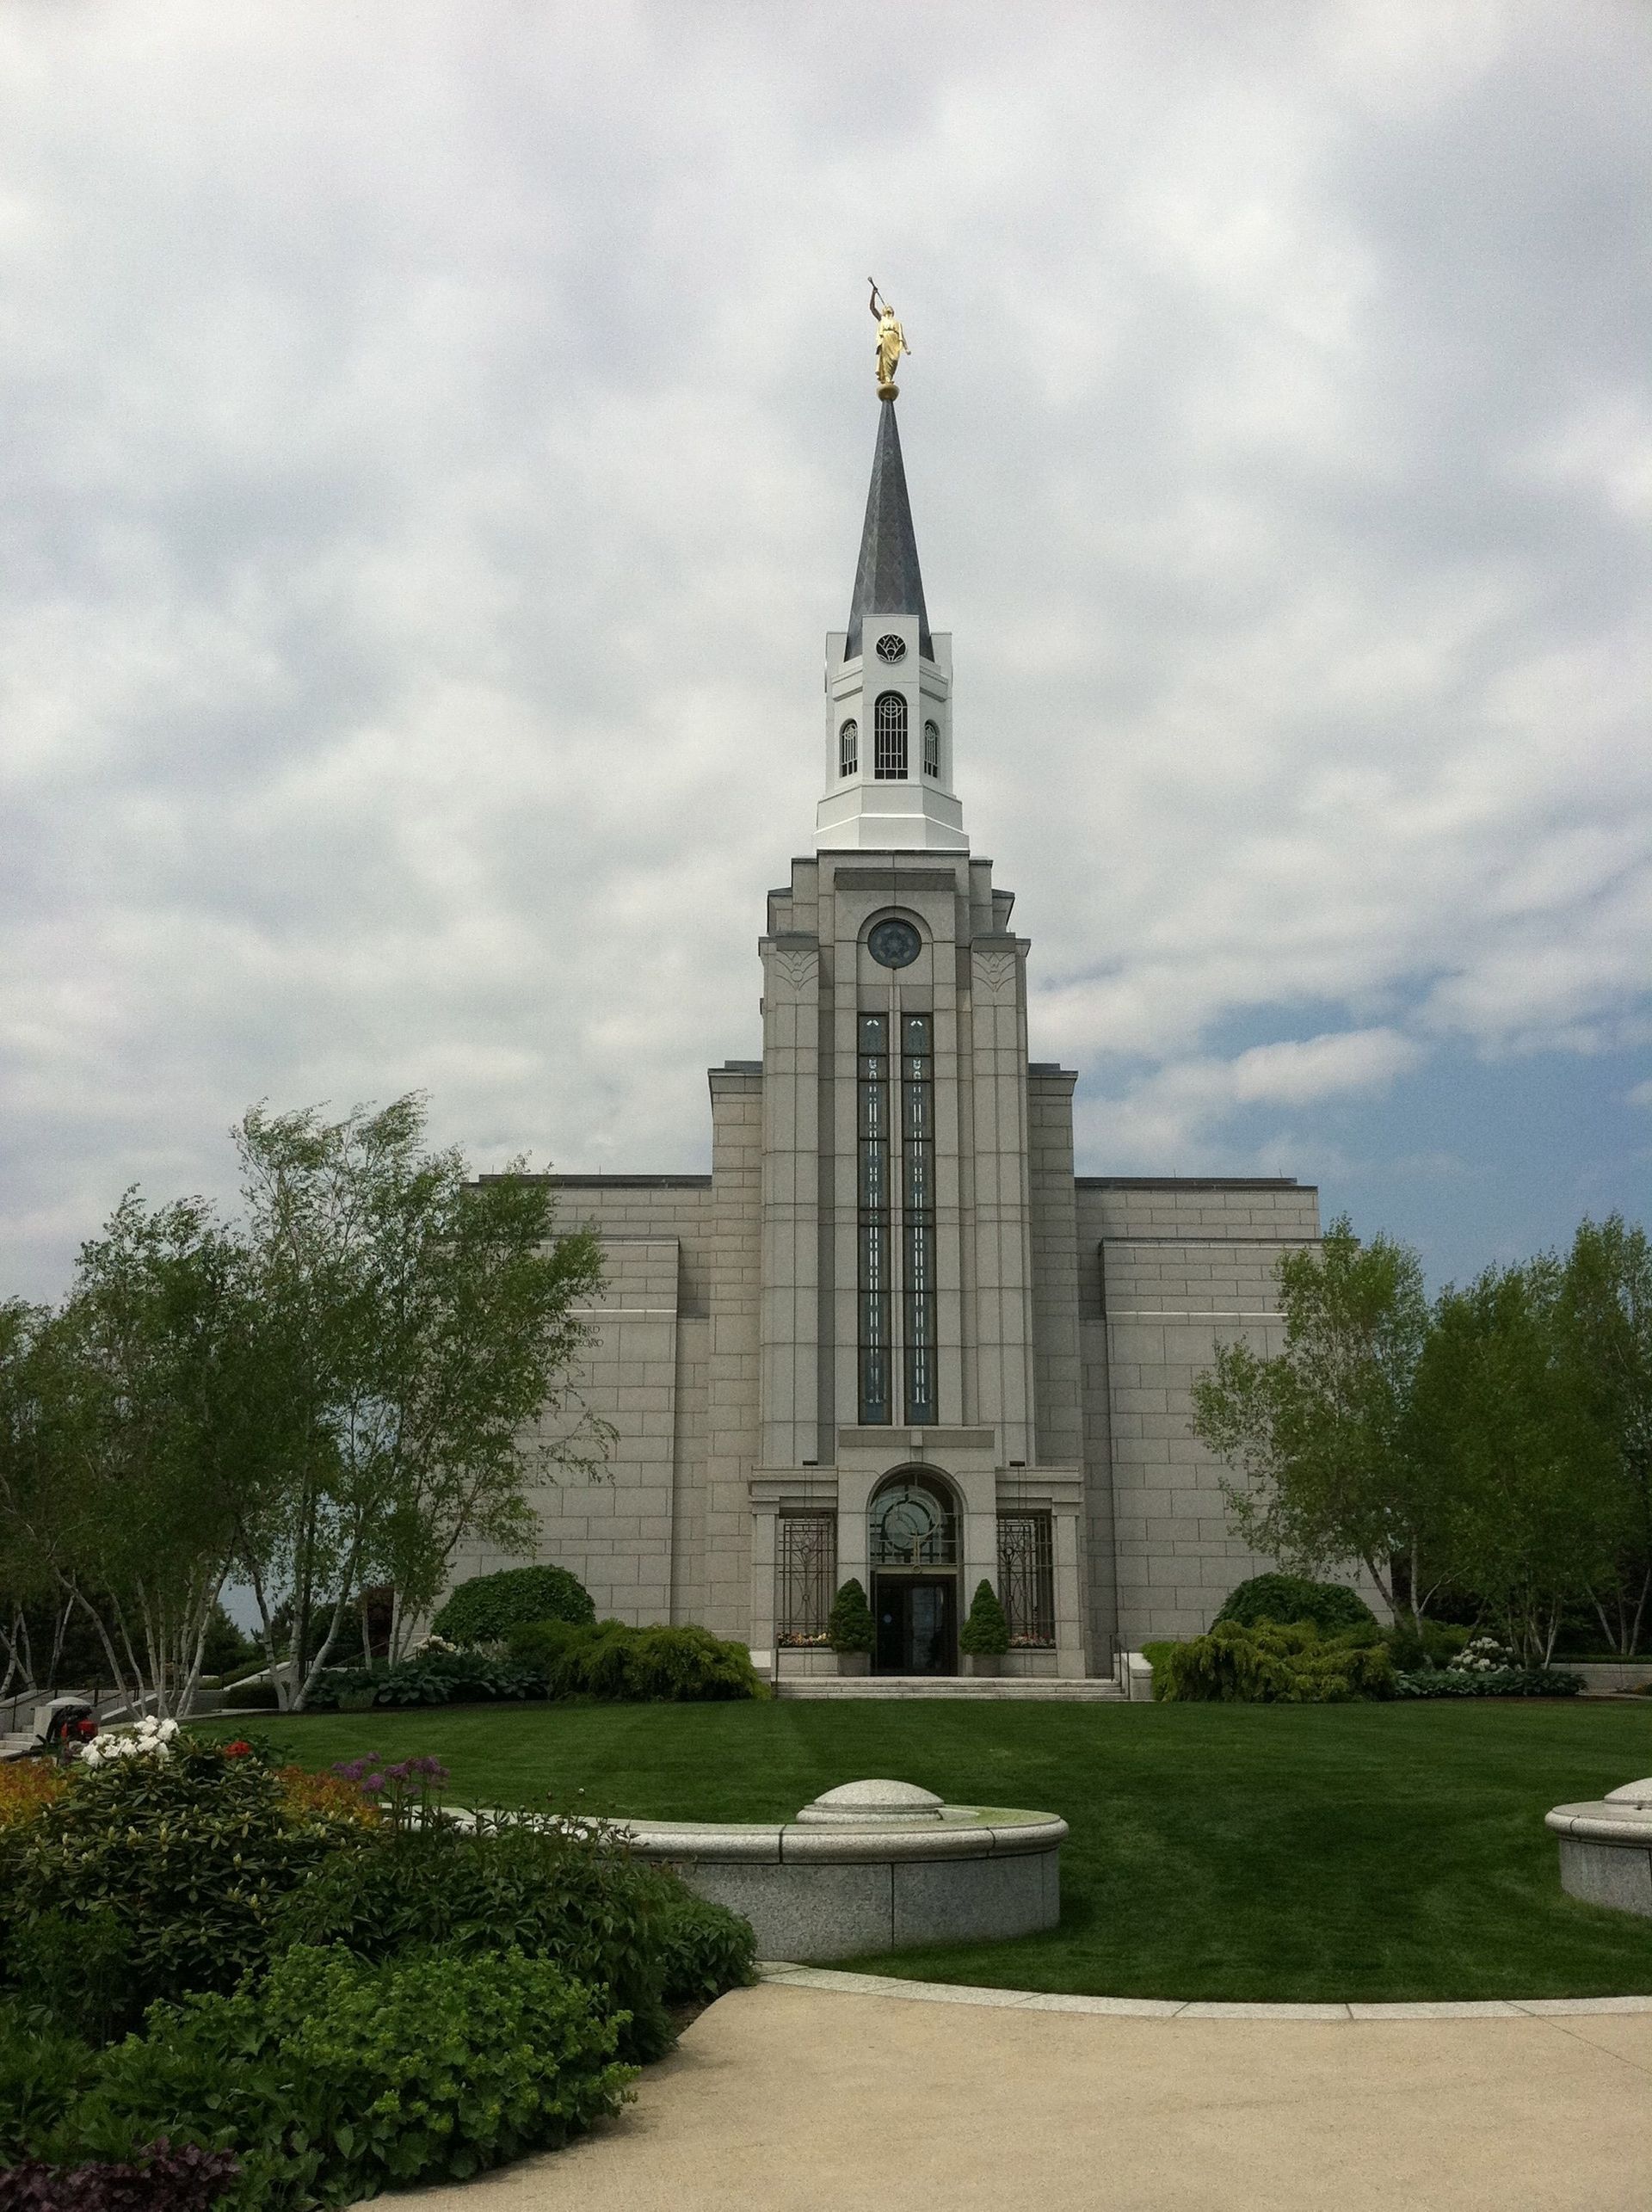 The front entrance to the Boston Massachusetts Temple.